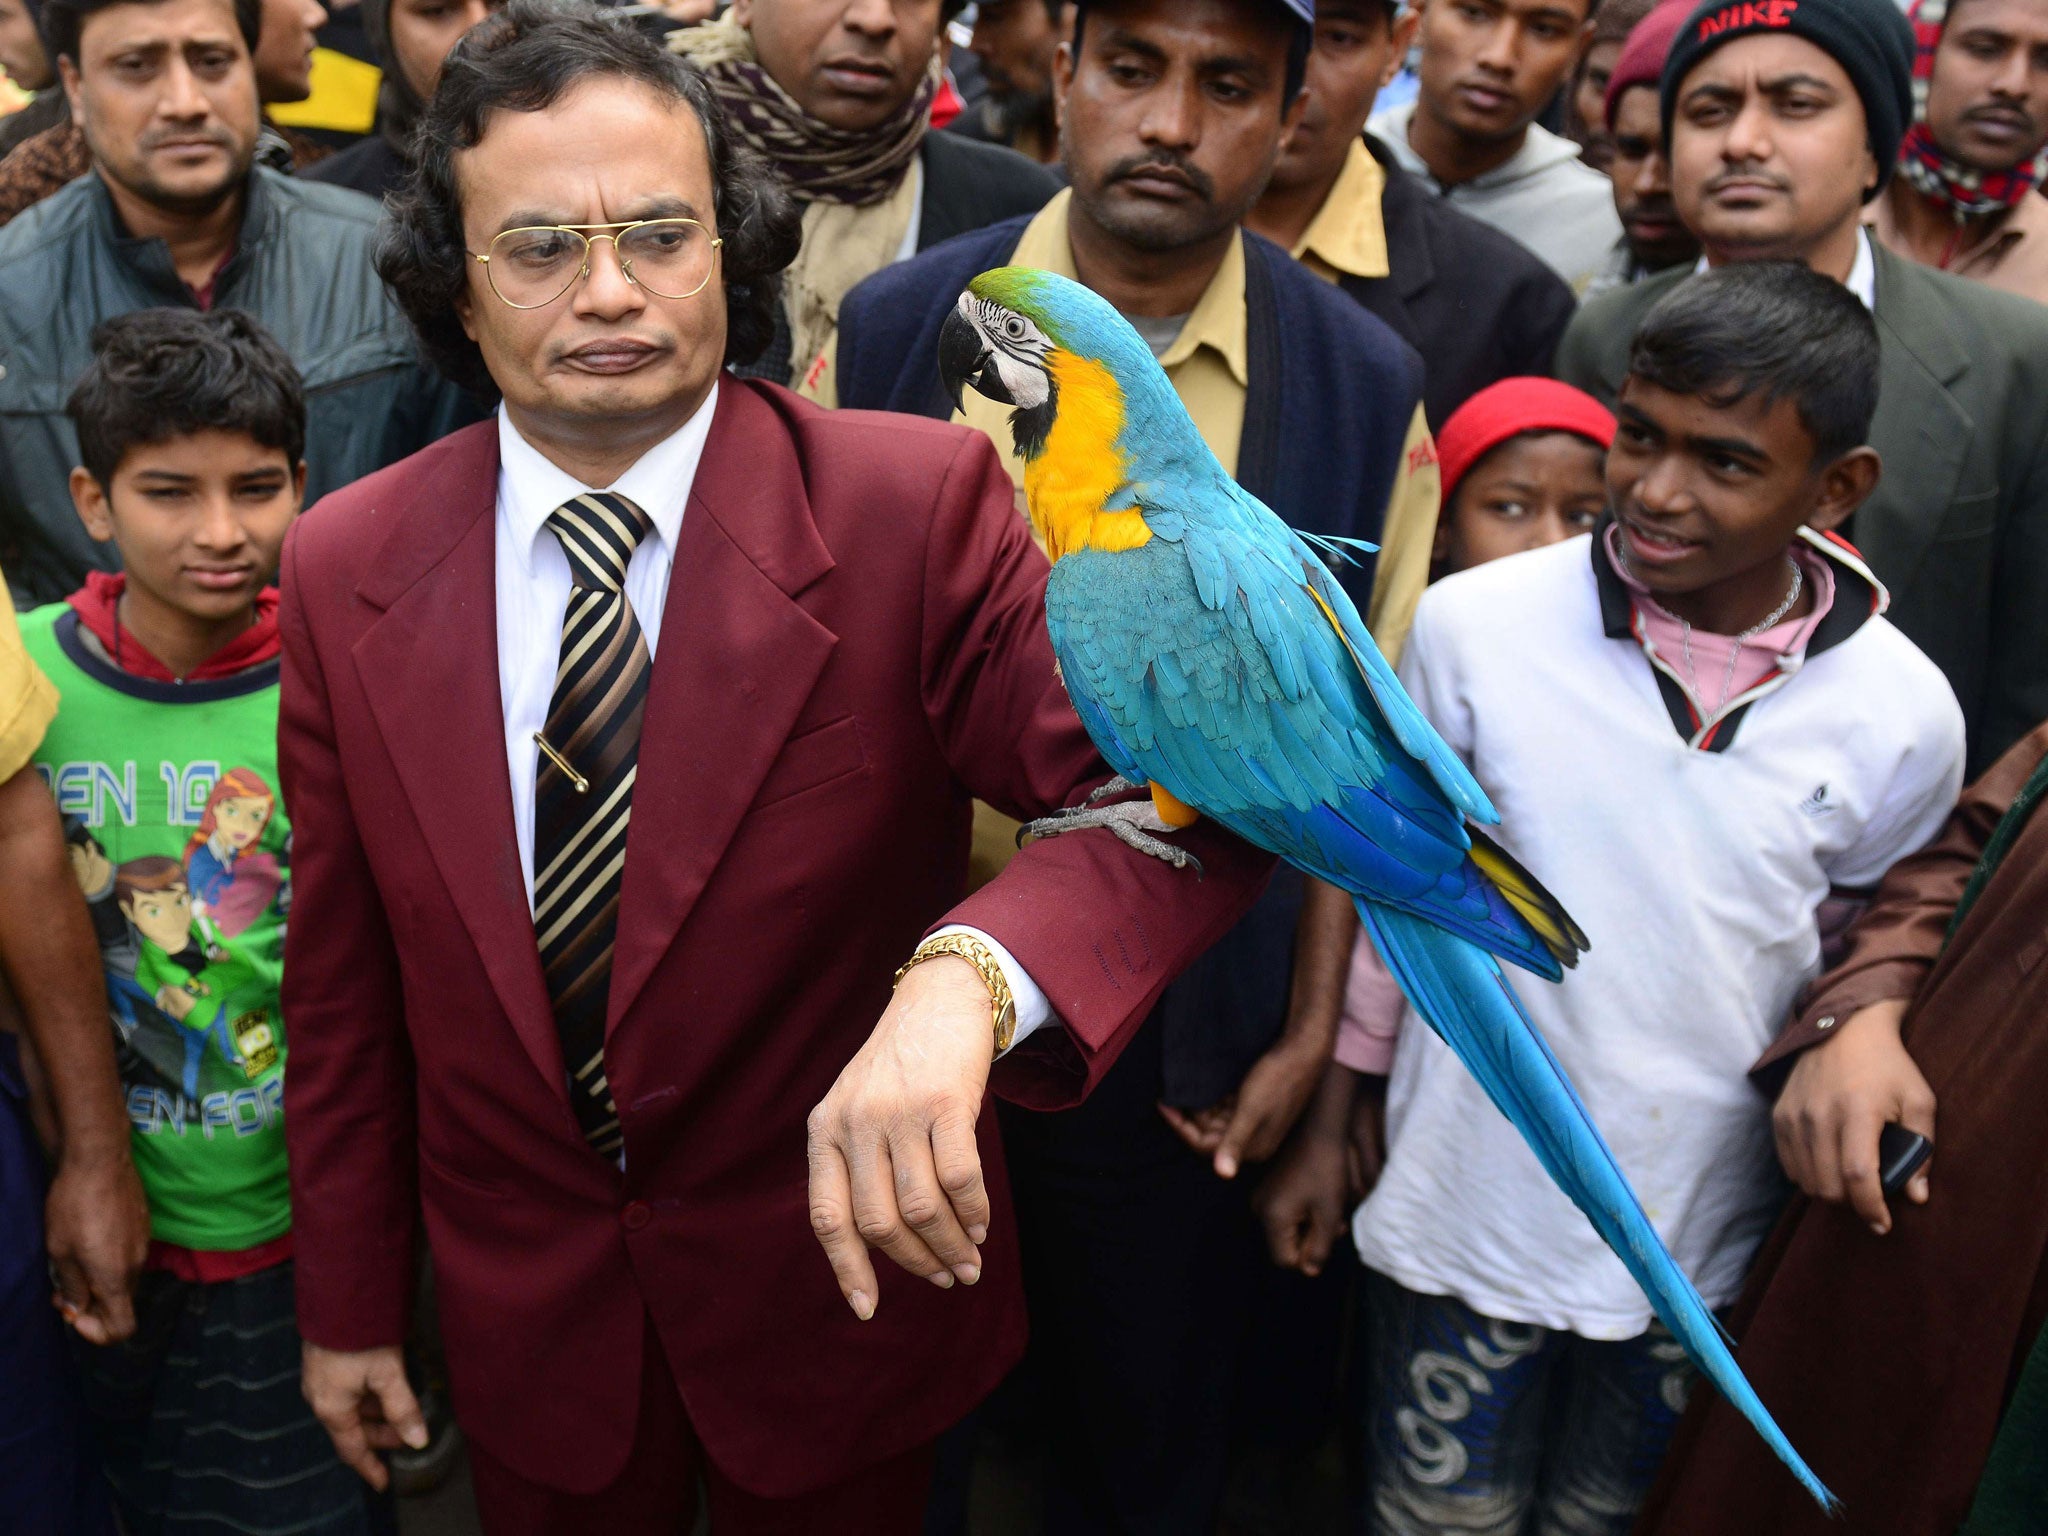 Parrot owner Abdul Wadud poses with Princess the macaw, who has refused to eat since being separated from her partner